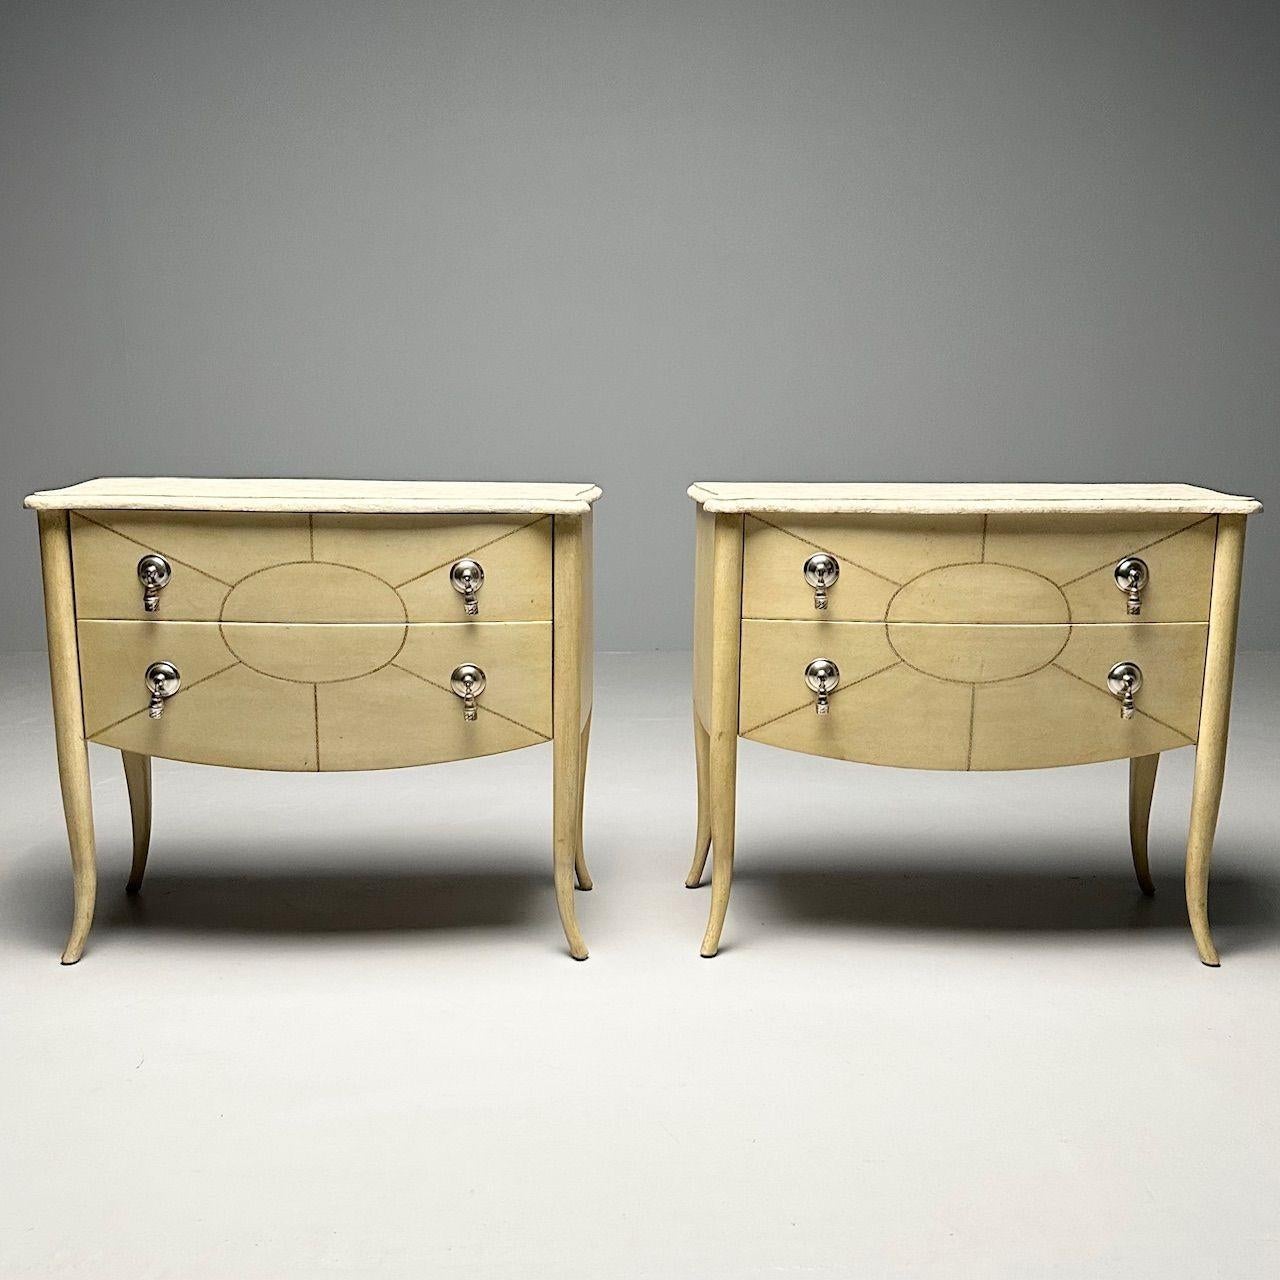 Andre Groult Style, Art Deco, Commodes, Beige Parchment Paper, Nickel, 1990s For Sale 15